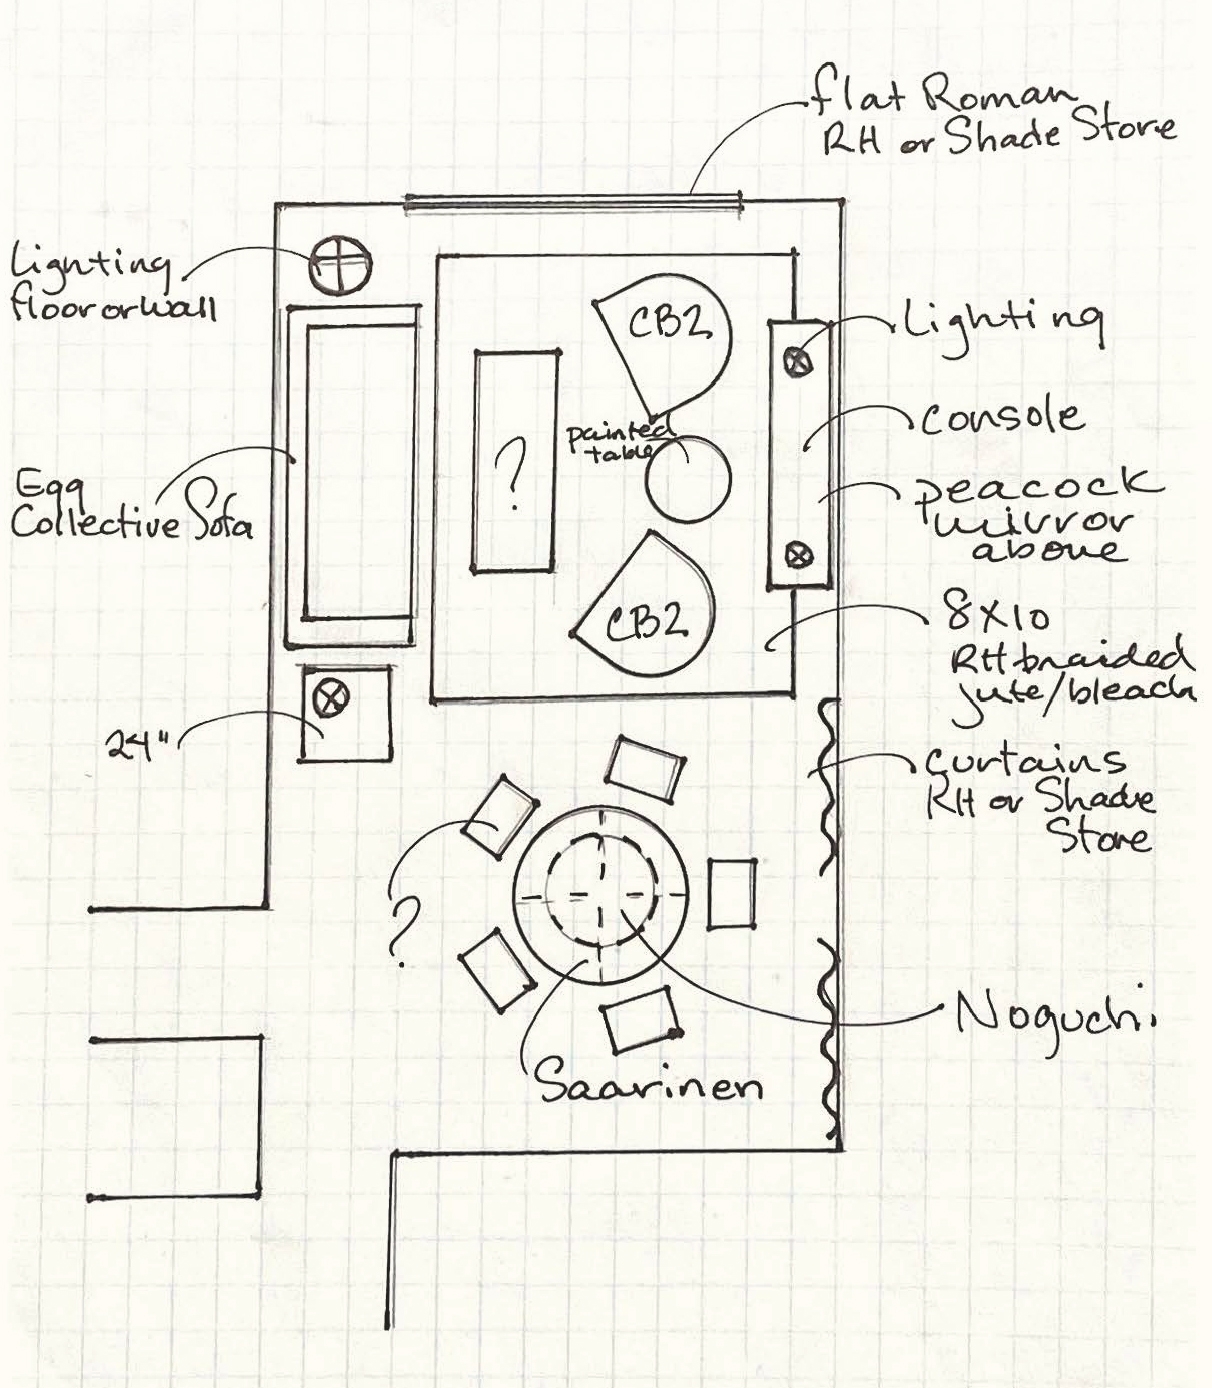 After receiving measurements of your space, we will do some preliminary sketches.&amp;nbsp;